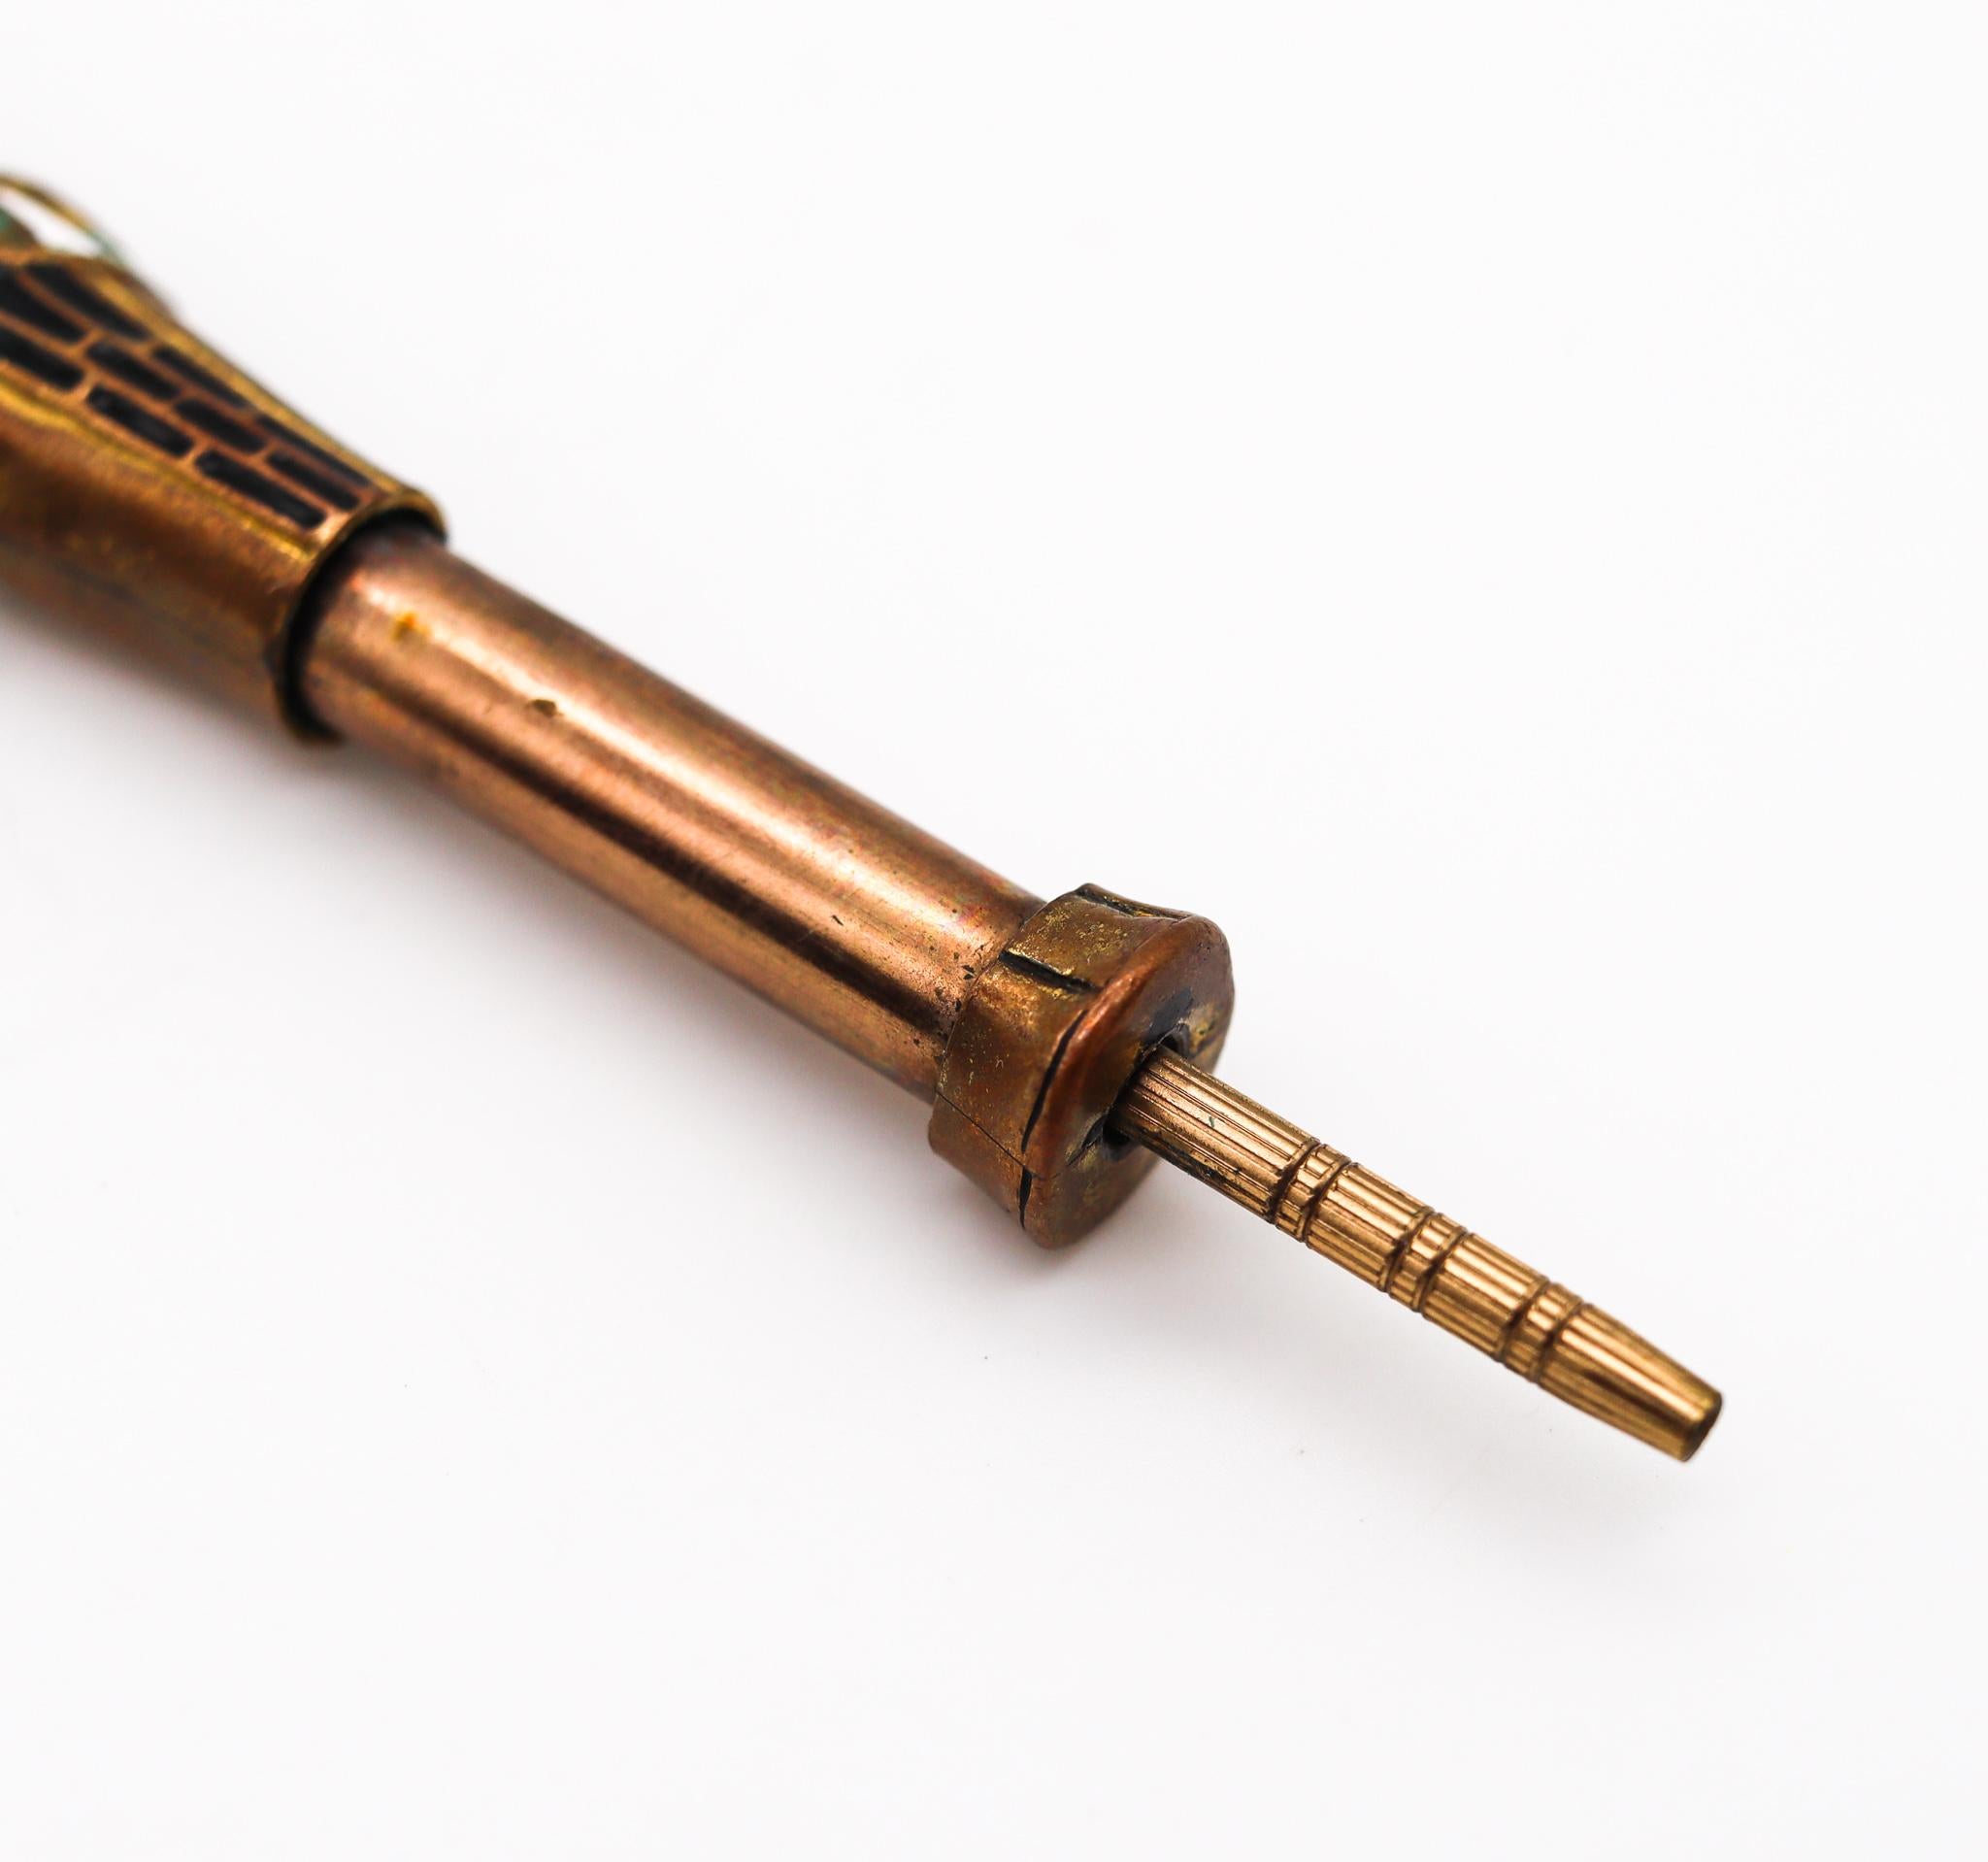 Egyptian revival Pharaoh mechanical pencil.

With the discovery of King Tutankhamun's tomb in 1922, 